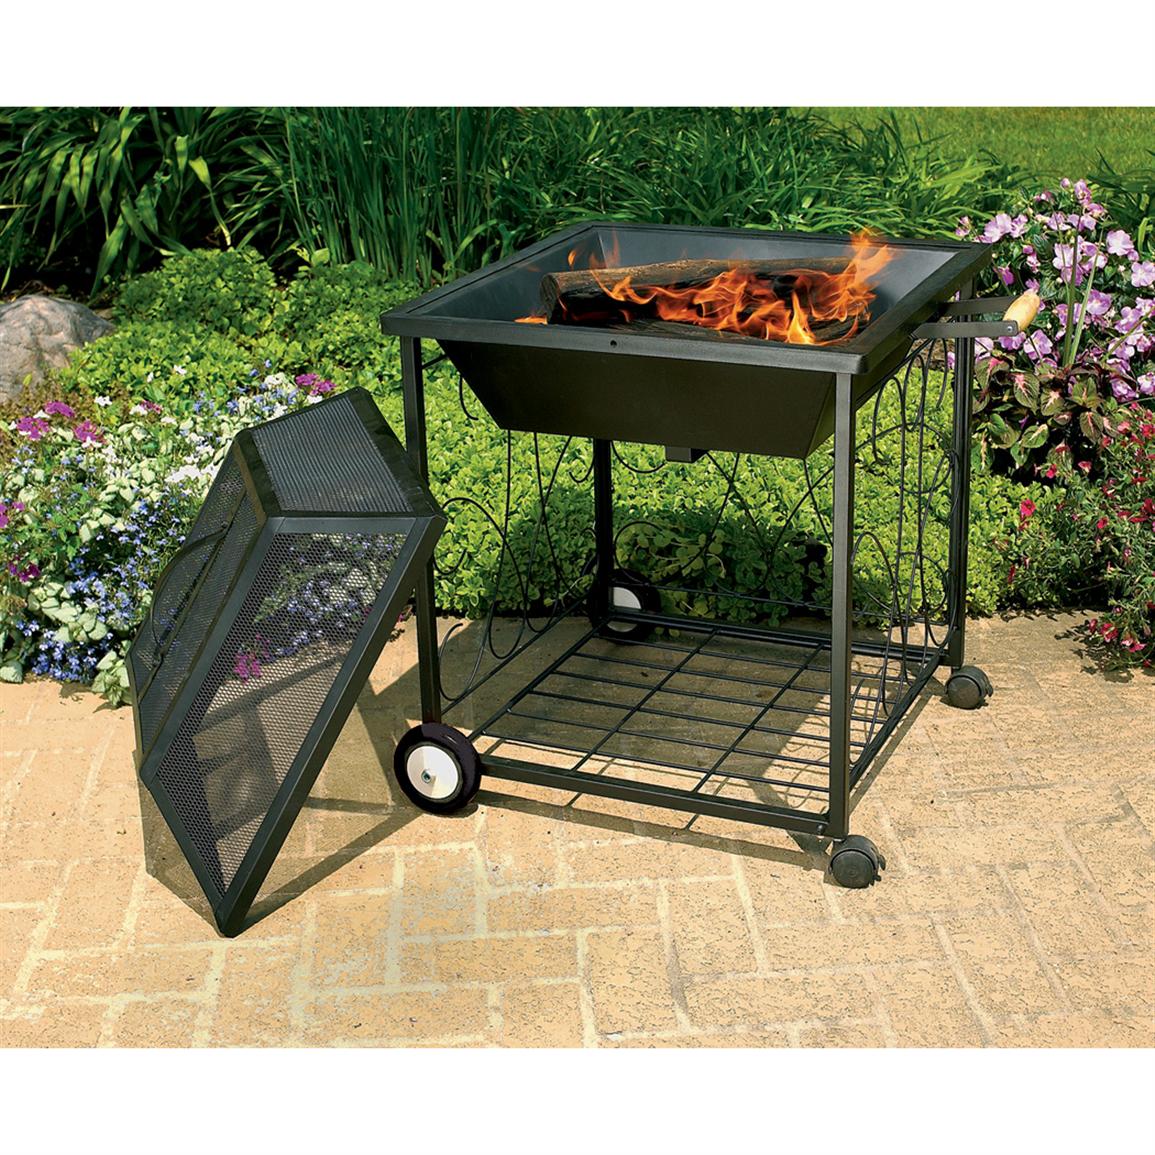 CobraCo® Square Portable Fire Pit with Wheels - 138670, Fire Pits & Patio  Heaters at Sportsman's Guide